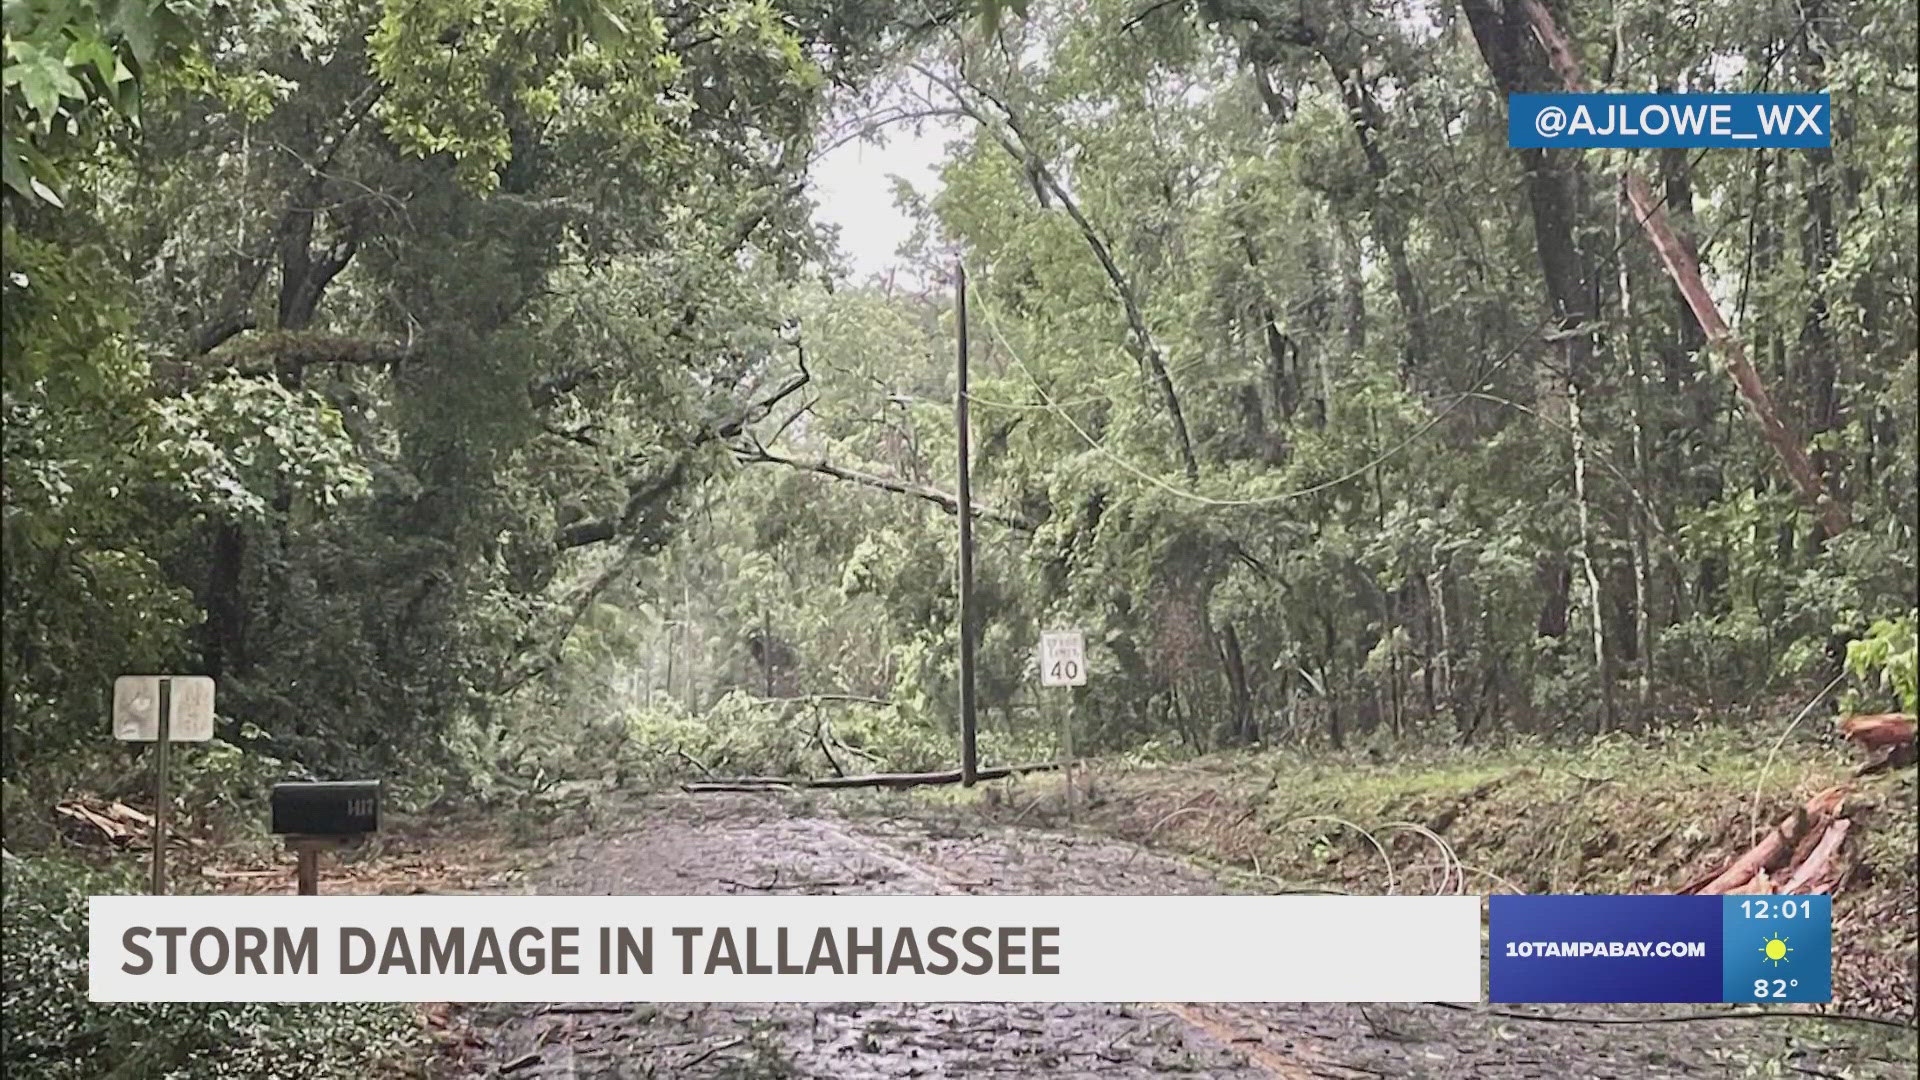 Tallahassee officials said more than 60,000 customers lost power.